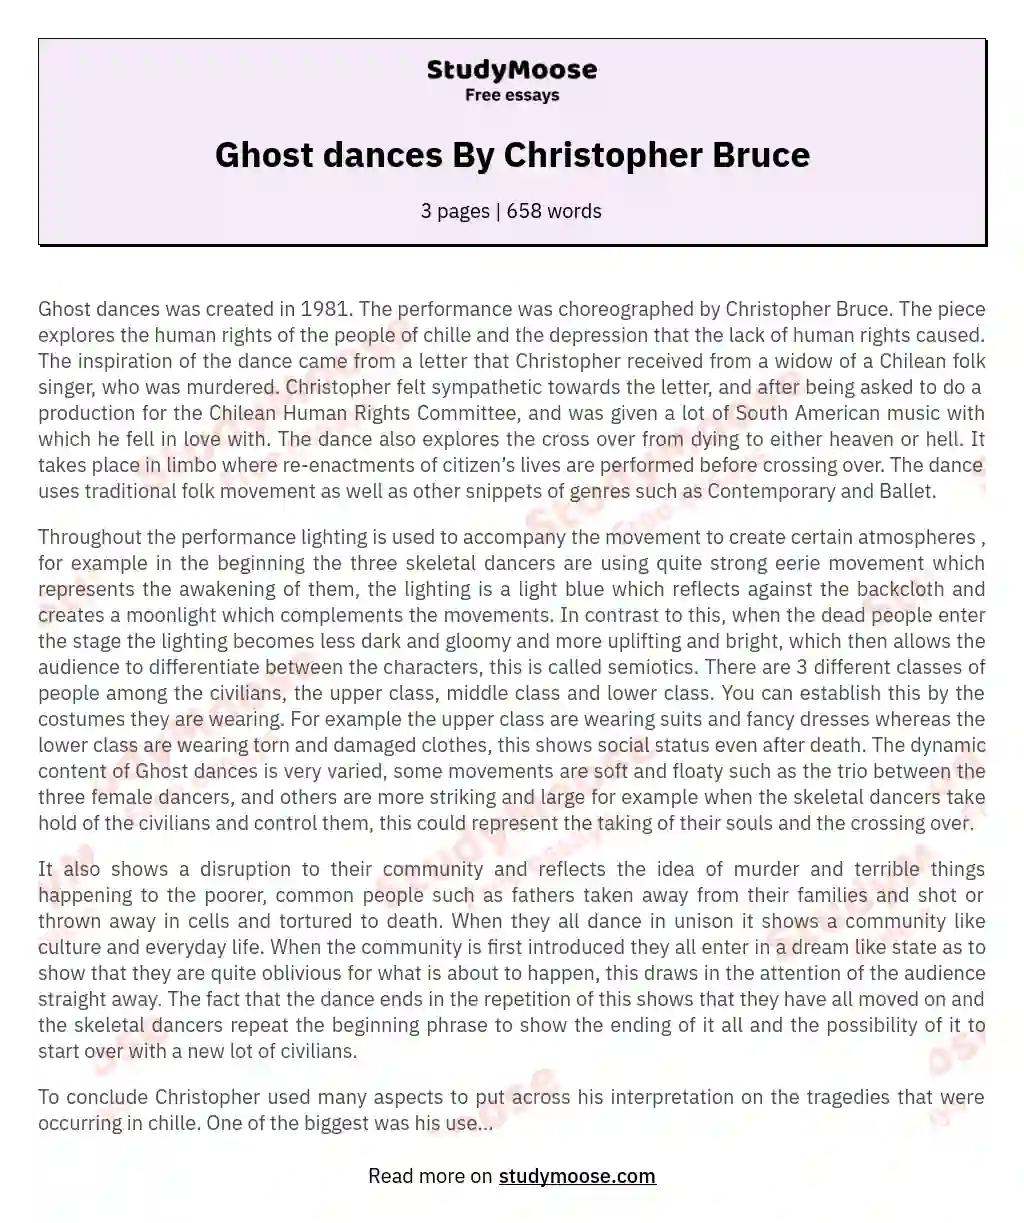 Ghost dances By Christopher Bruce essay